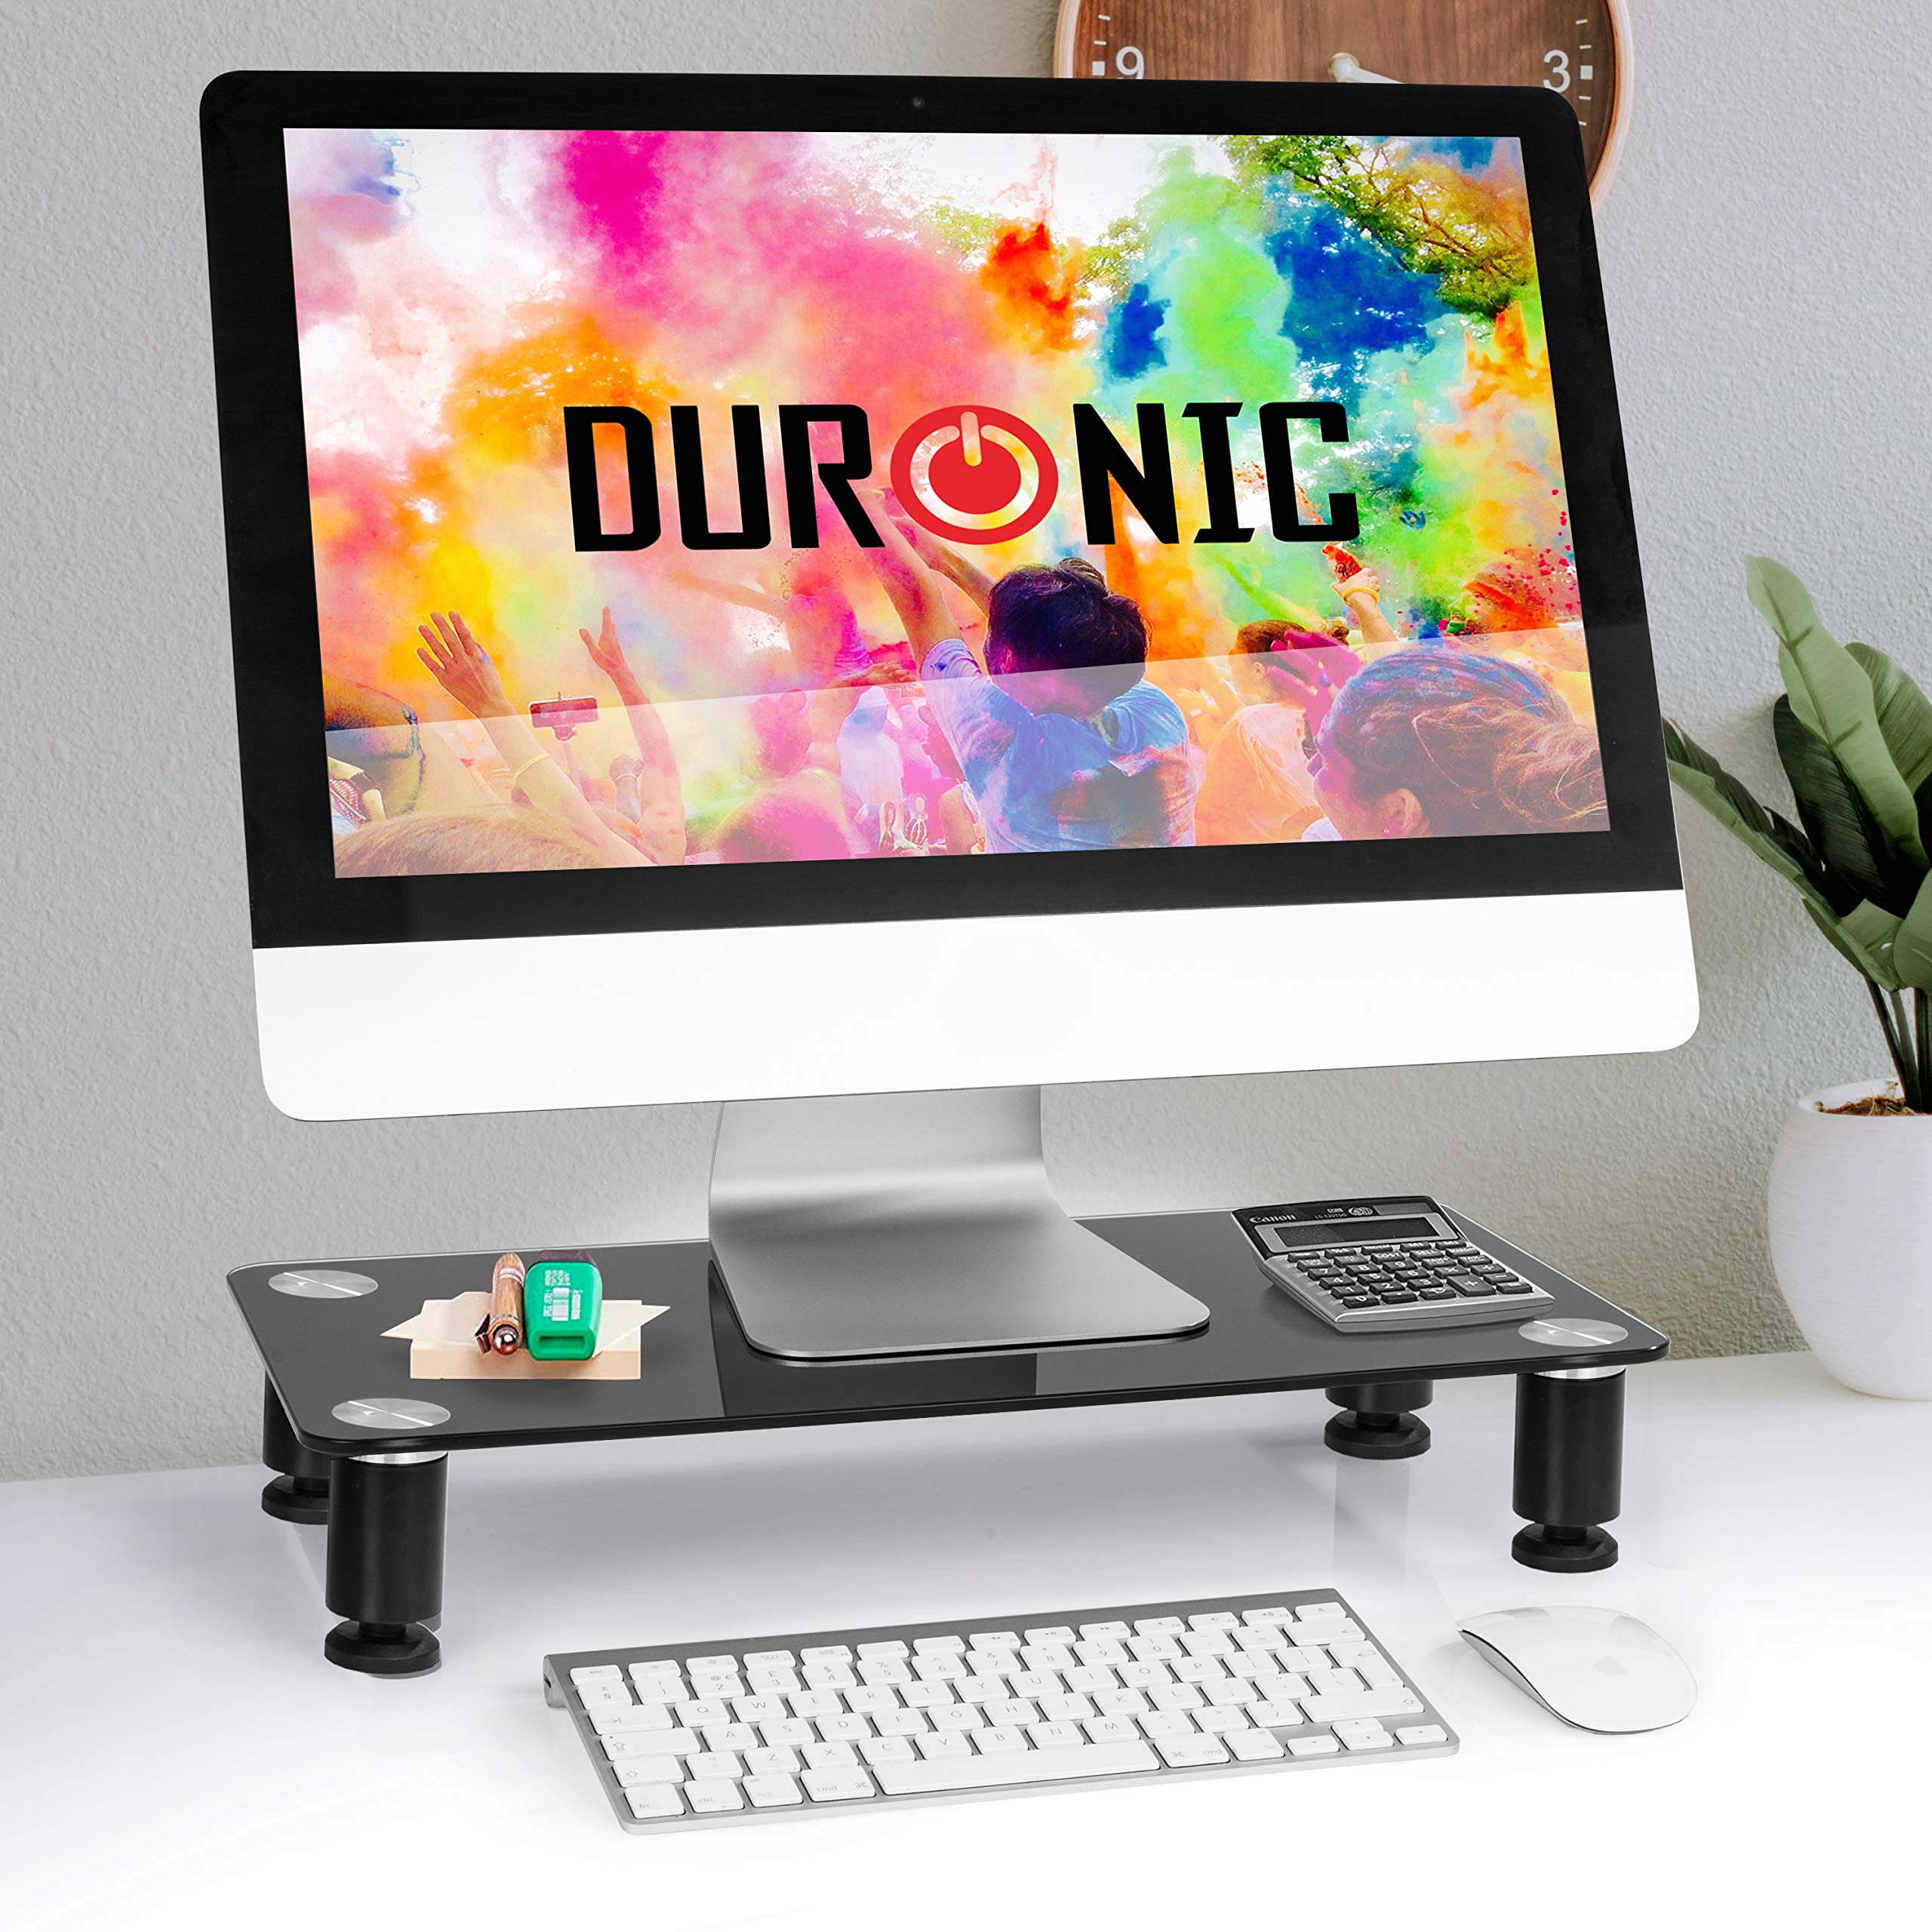 Duronic Monitor Stand Riser DM051 | Laptop and Screen Stand for Desktop | Black Tempered Glass | Support for a TV or PC Computer Monitor | Ergonomic Office Desk Shelf | 40kg Capacity | 63x25cm